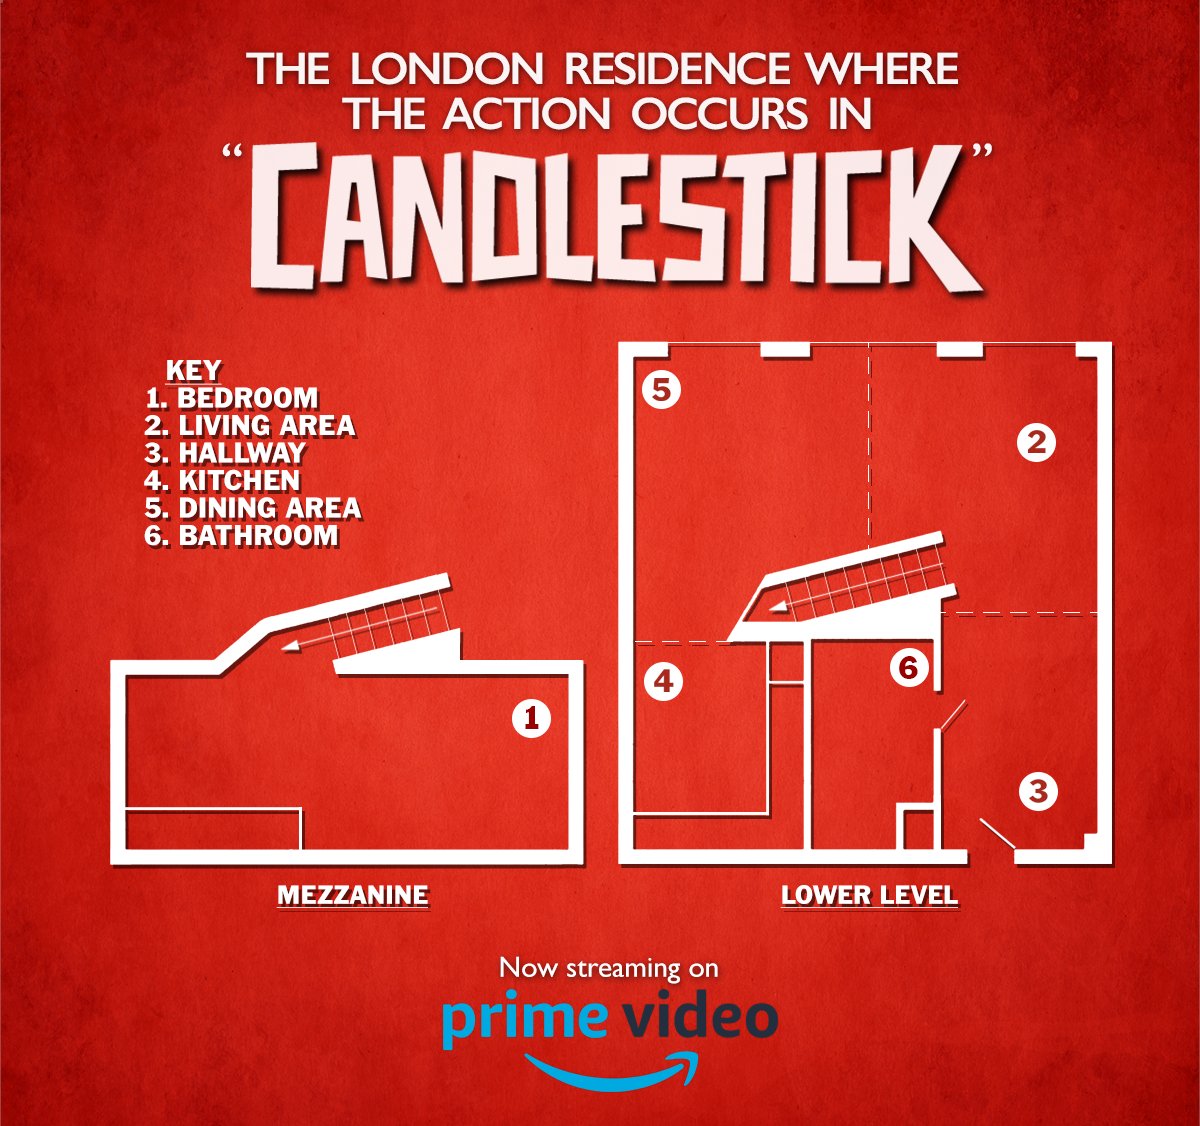 Just because you're stuck indoors, doesn't mean you can't play a game... Stream Candlestick now on @PrimeVideo. hyperurl.co/candlestick